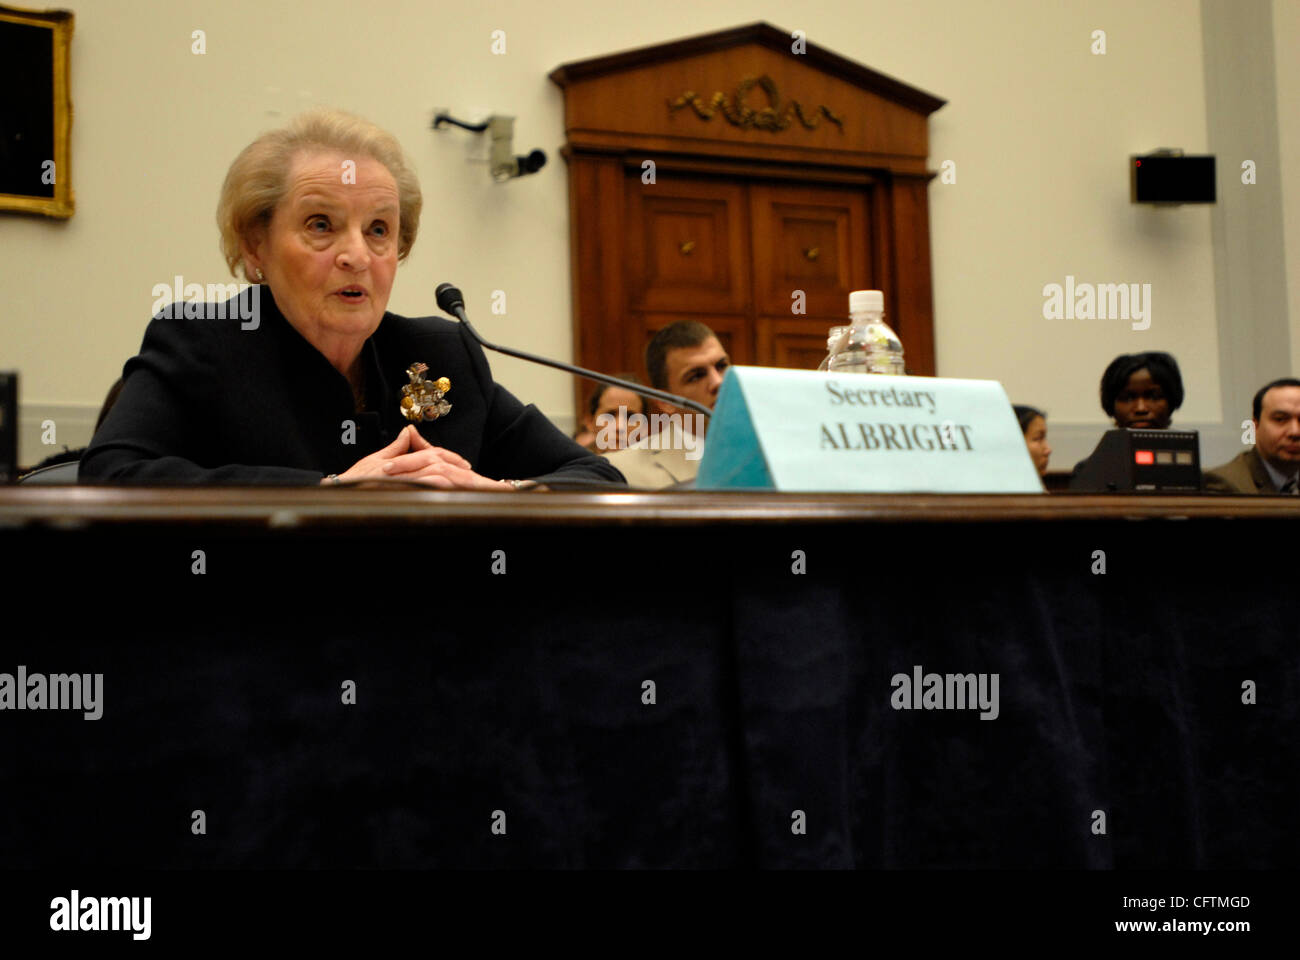 Jan 17, 2007; Washington, DC, USA; Former Secretary of State MADELINE ALBRIGHT testifies in front of the House Foreign Affairs Committee about her opinion on the current state of the wars in Iraq and Afghanistan. Mandatory Credit: Photo by Mark Murrmann/ZUMA Press. (©) Copyright 2007 by Mark Murrman Stock Photo